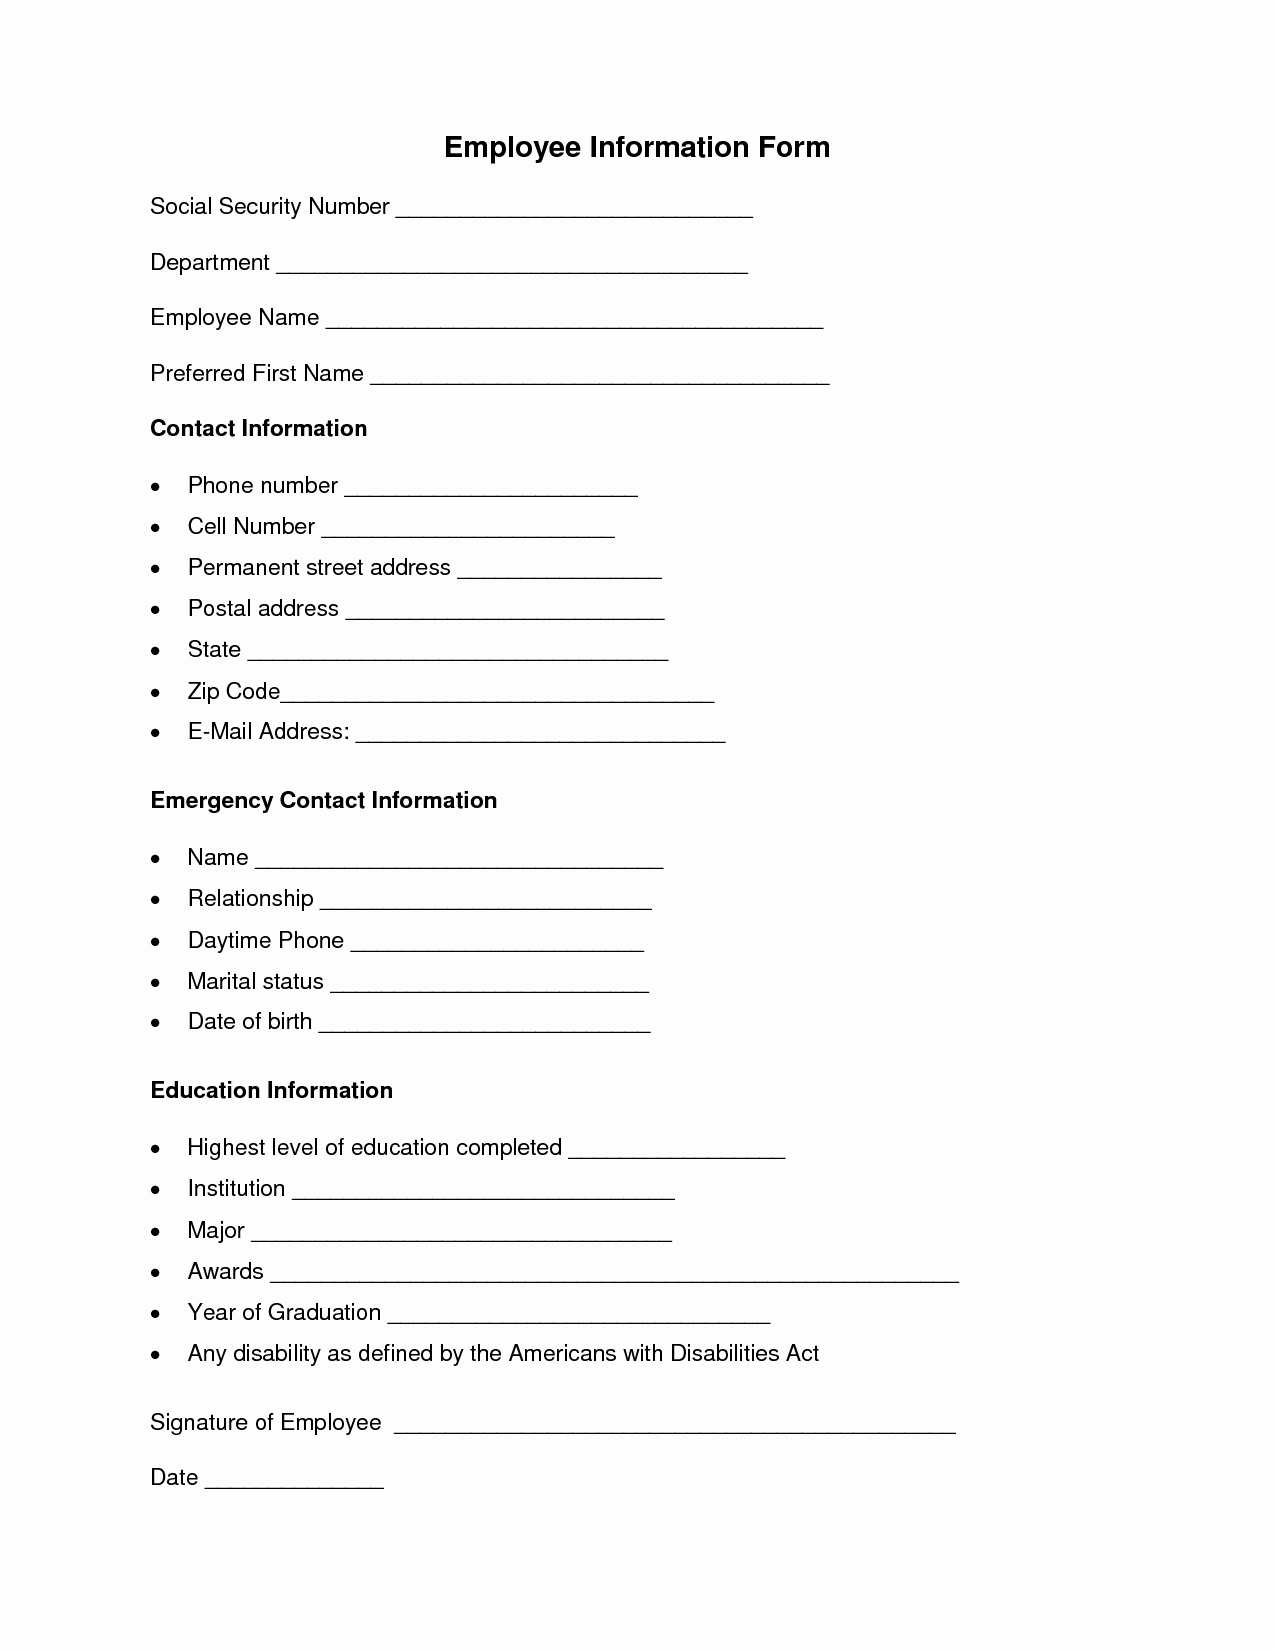 Information form Template Awesome Employee Information form Employee forms